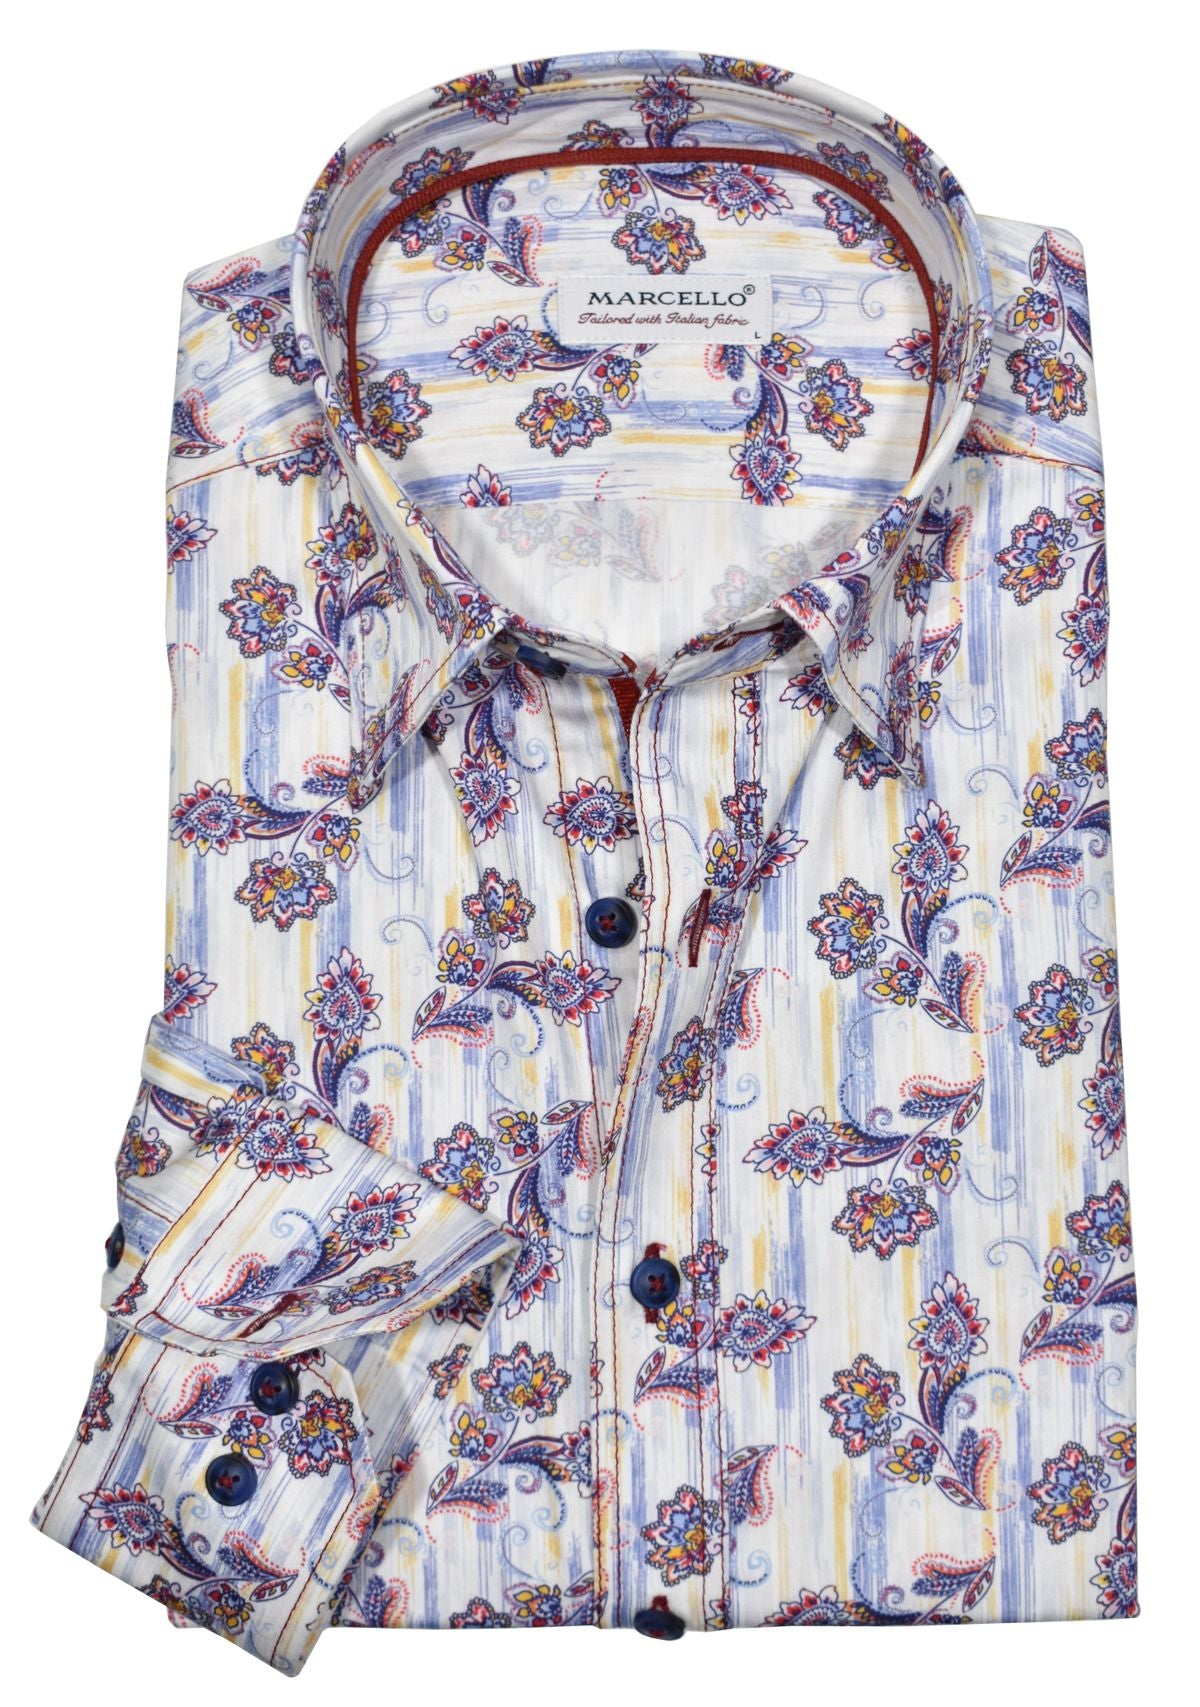 Luxurious cotton fabric, eye-catching open multi color floral pattern in beautiful gem hue colors creates a uniquely outstanding sport shirt. Elegant style ideal for any event. It's the perfect way to add a touch of sophistication to any outfit. Shirt by Marcello.